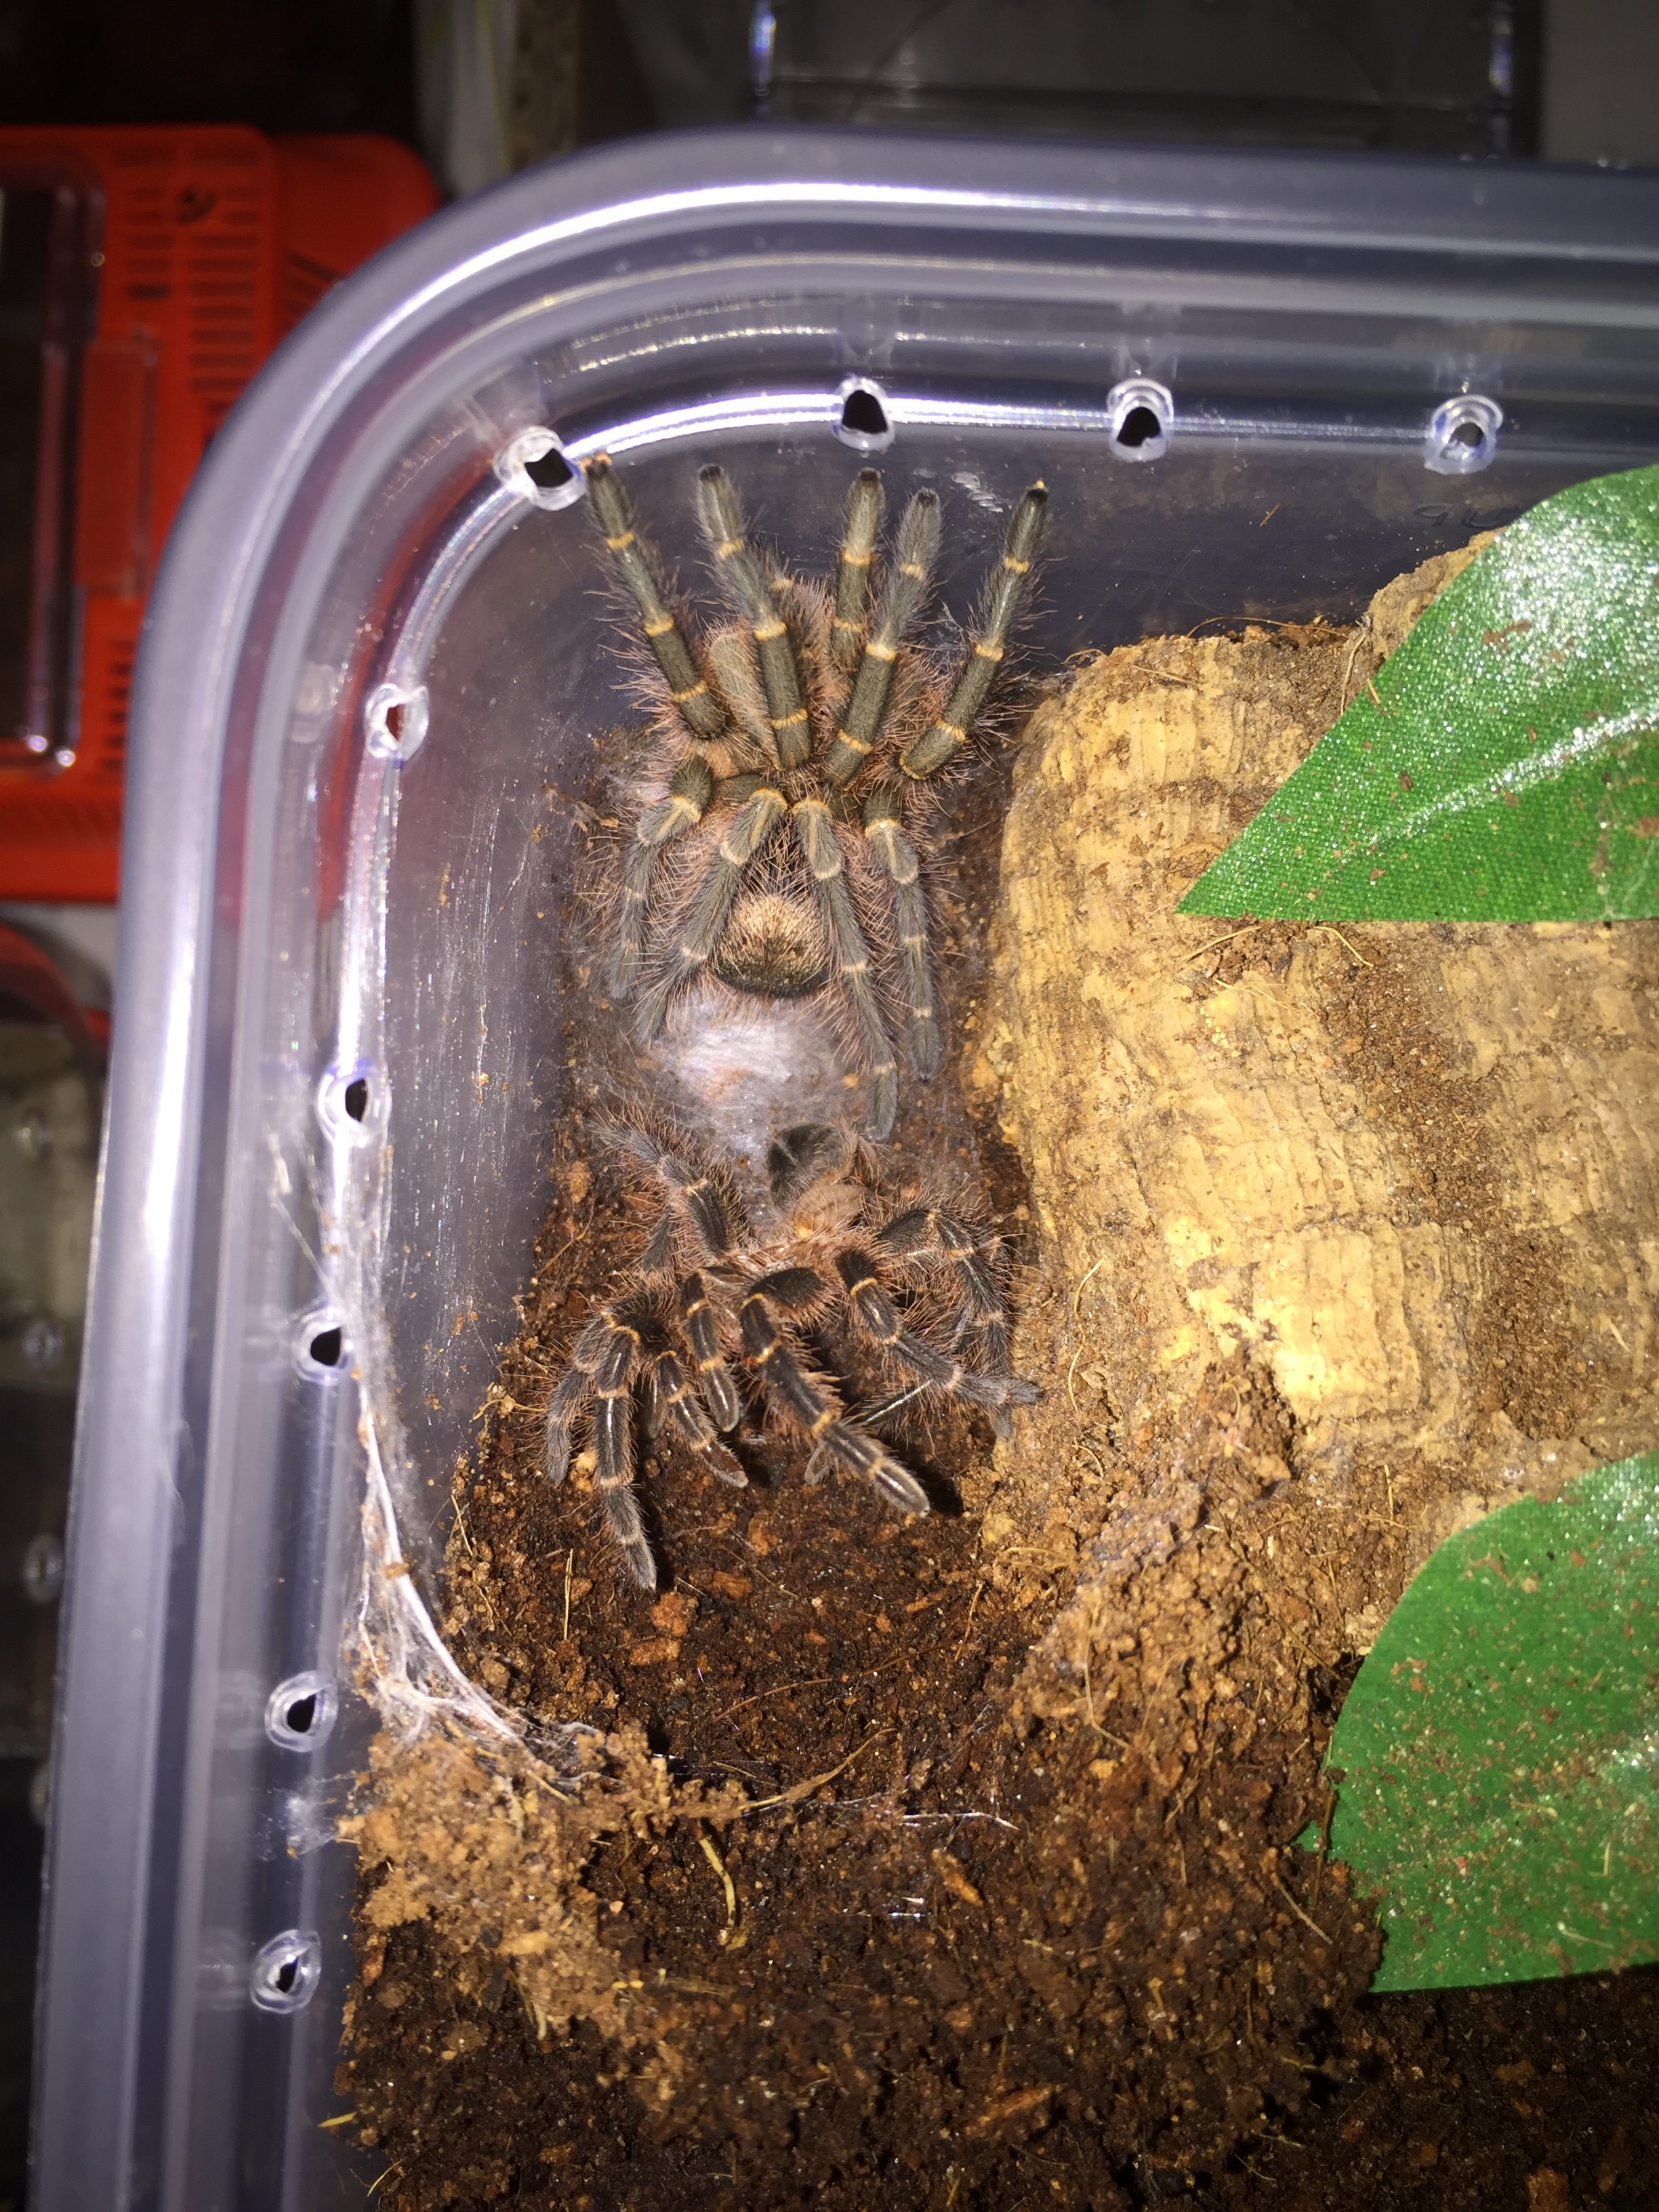 G pulchripes done molting